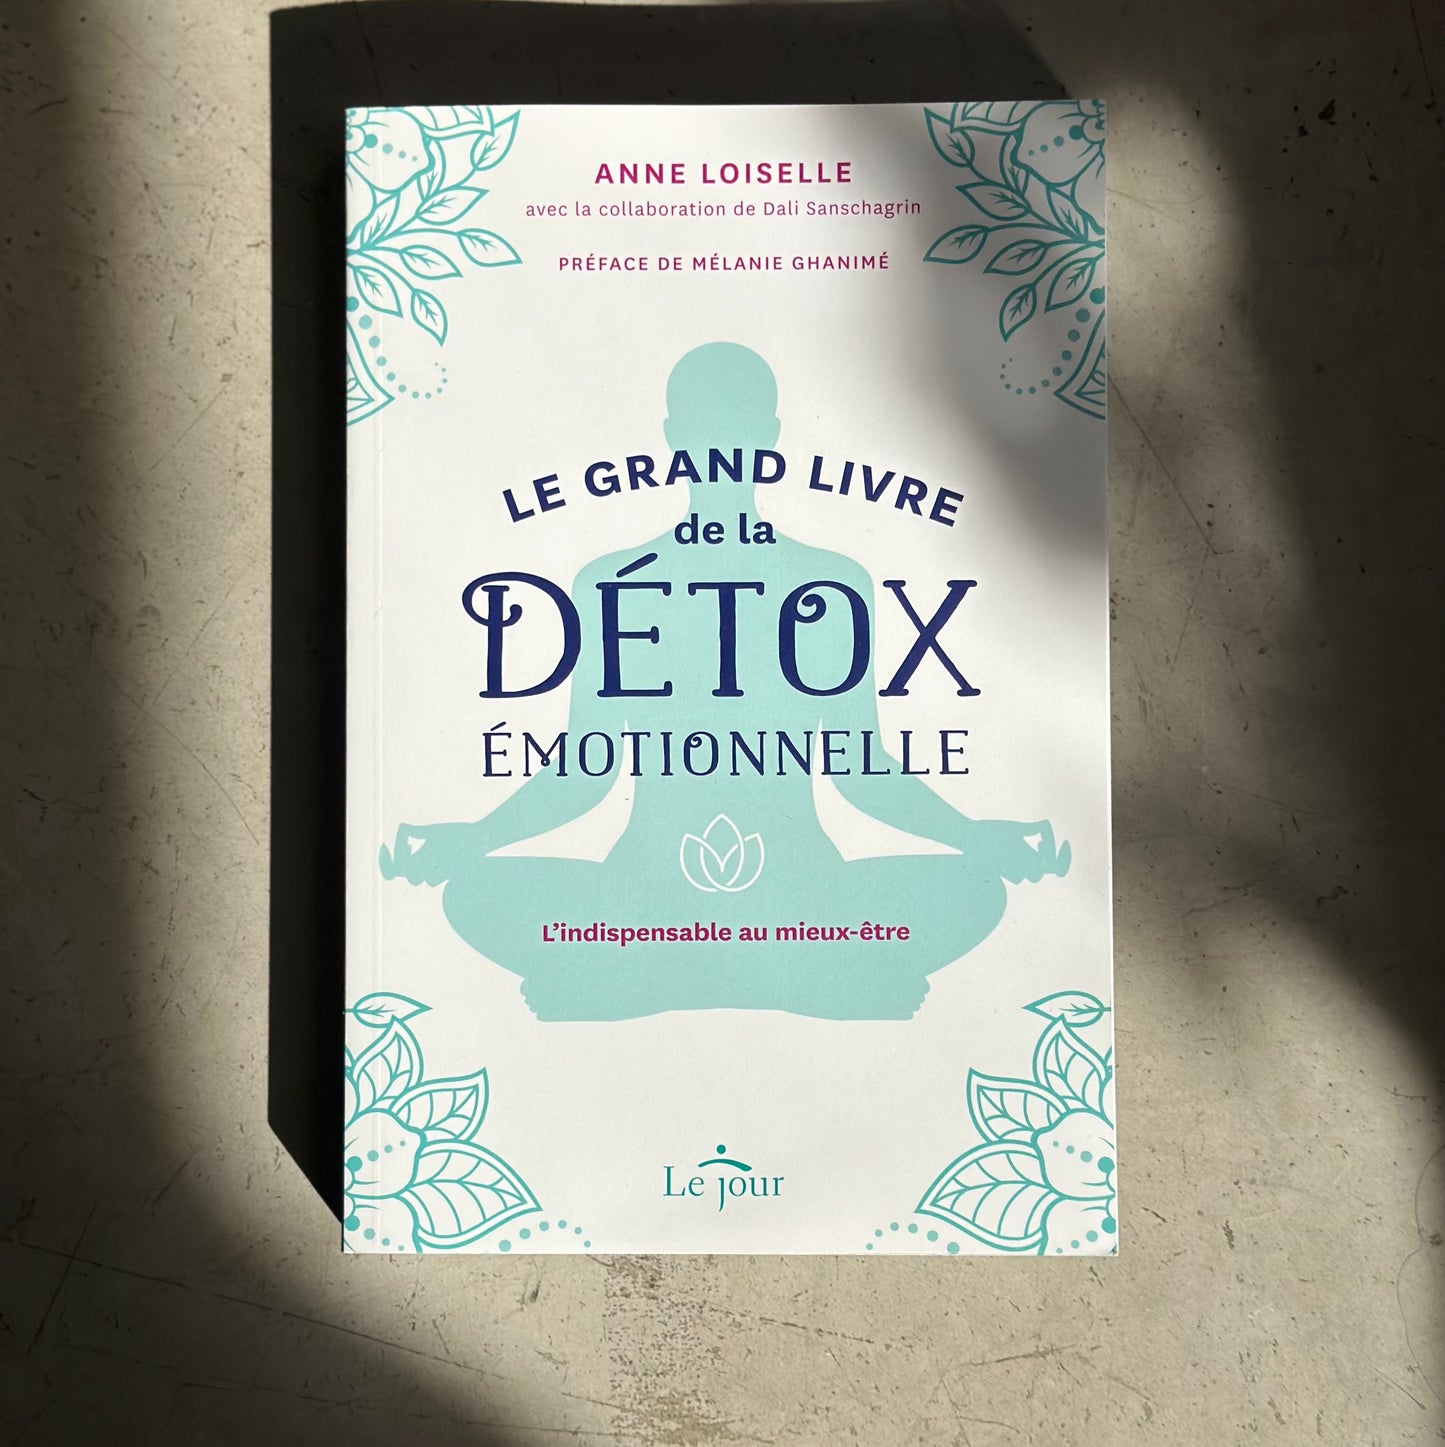 The great book of emotional detox - Anne Loiselle